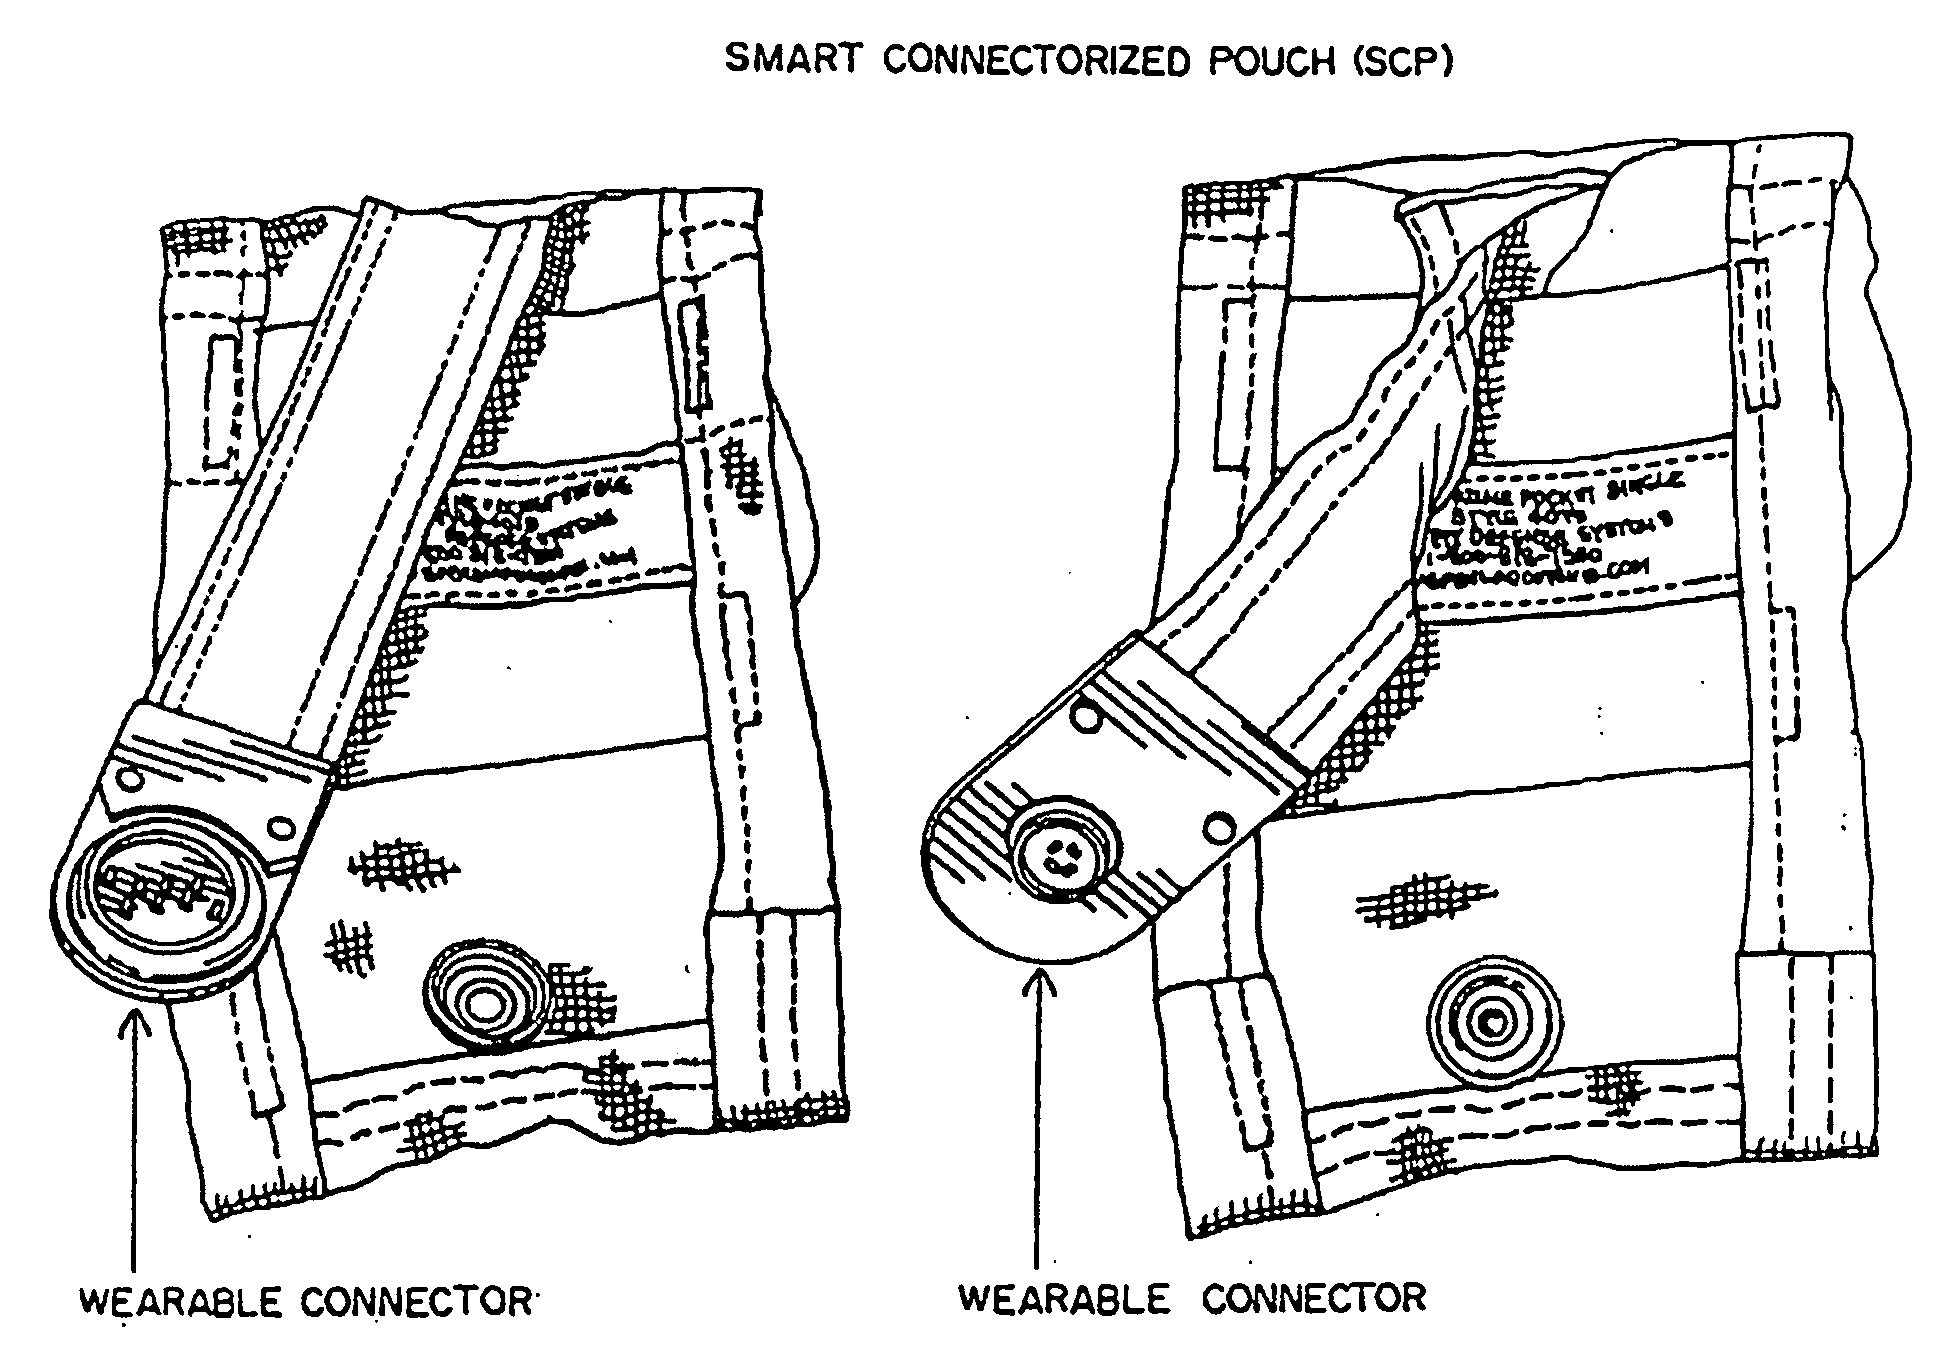 Self-identifying electrical connector